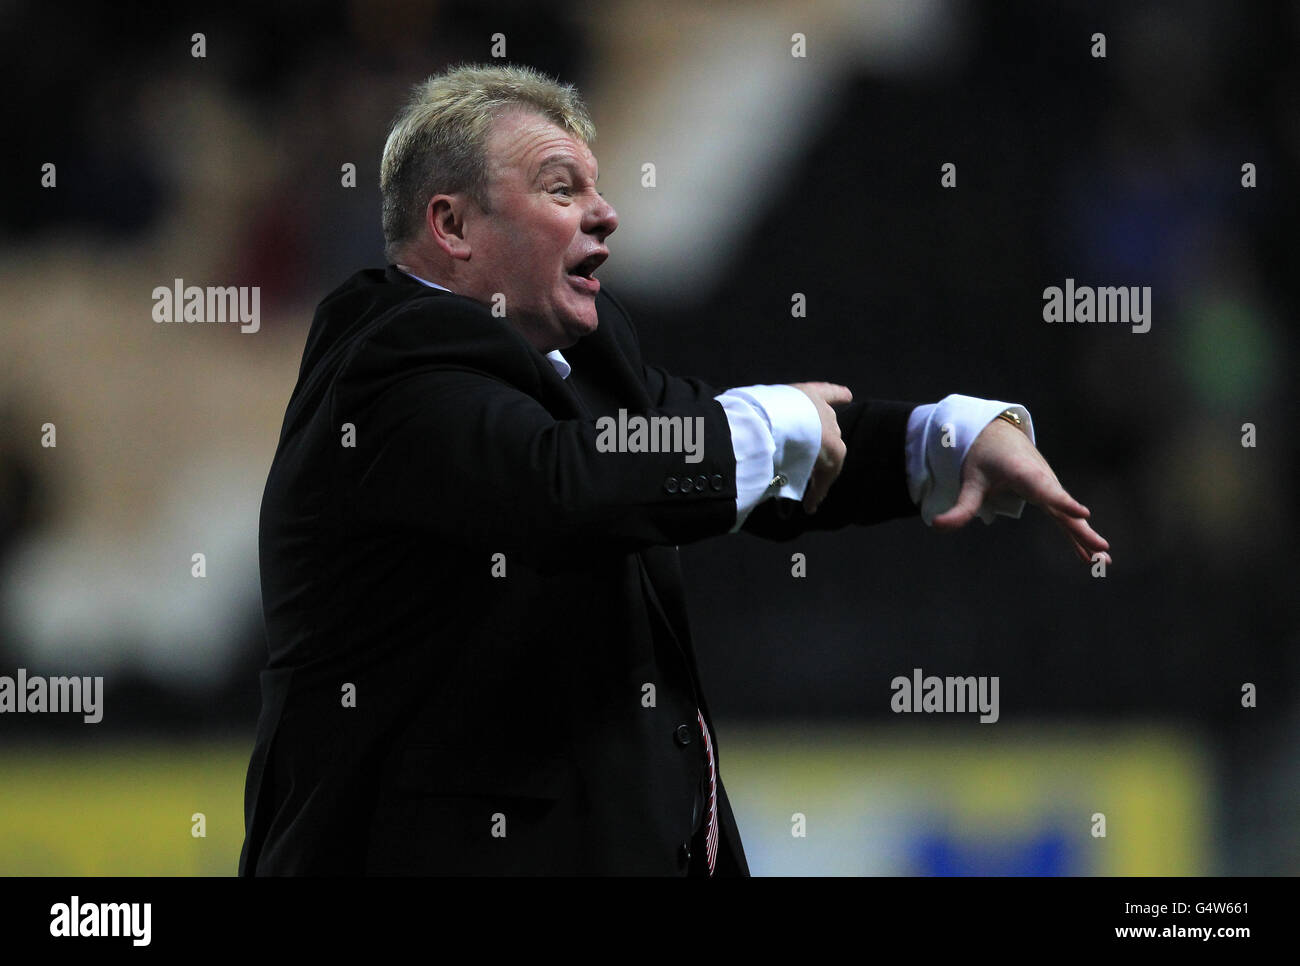 Soccer - FA Cup - Fourth Round - Hull City v Crawley Town - KC Stadium. Crawley Town's manager Steve Evans has heated words in the dug outs Stock Photo